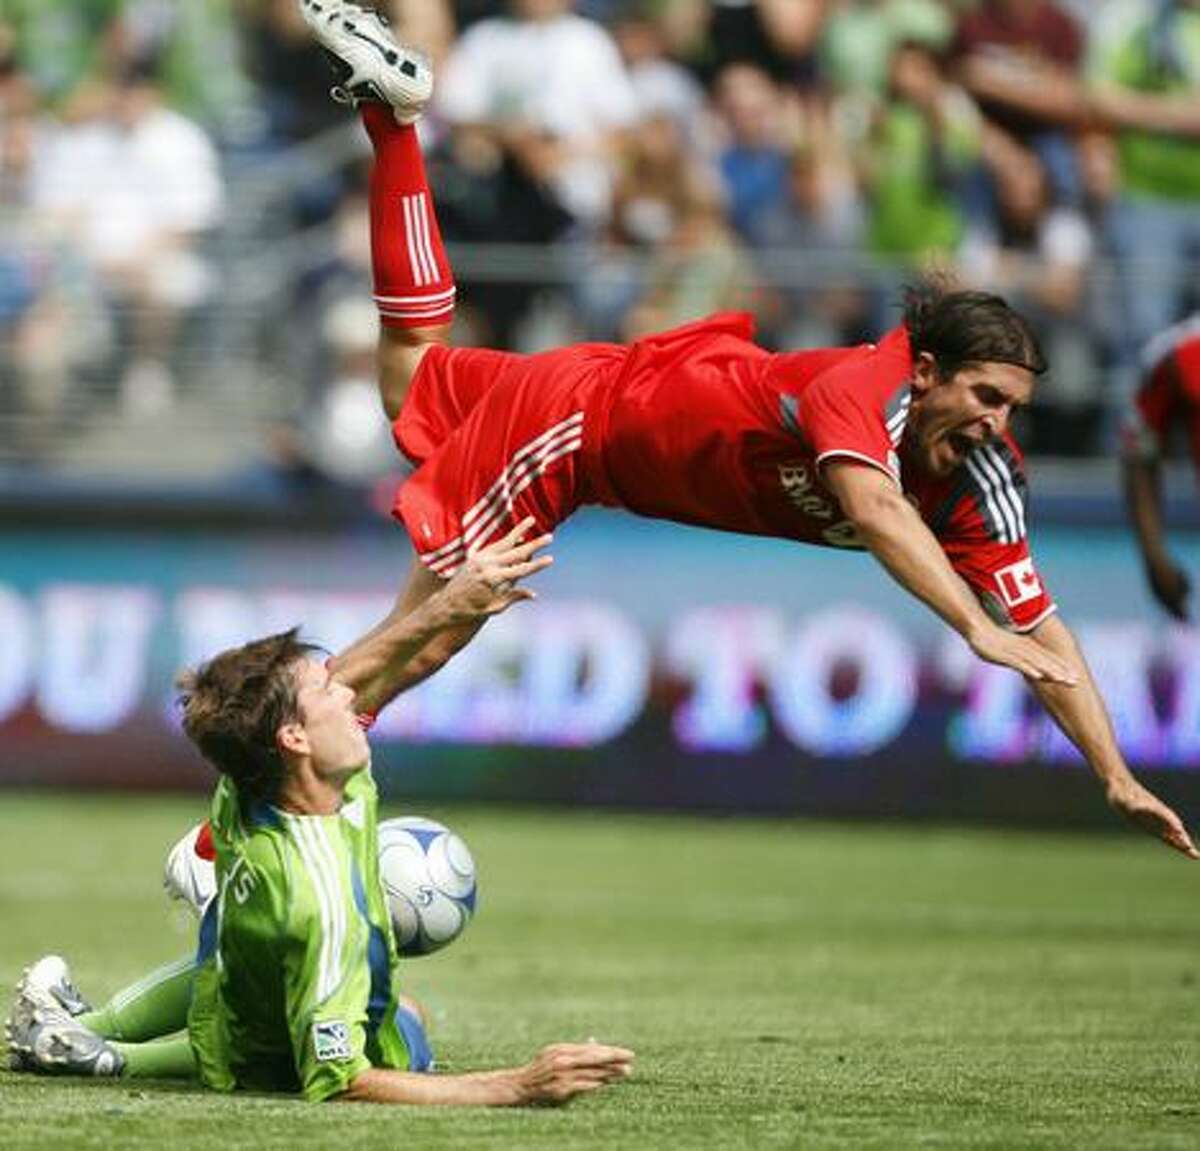 Seattle Sounders player Brad Evans and Toronto FC player Nick Garcia tangle near the Sounders' goal on Saturday August 29, 2009 in the second half of a match at Qwest Field in Seattle.